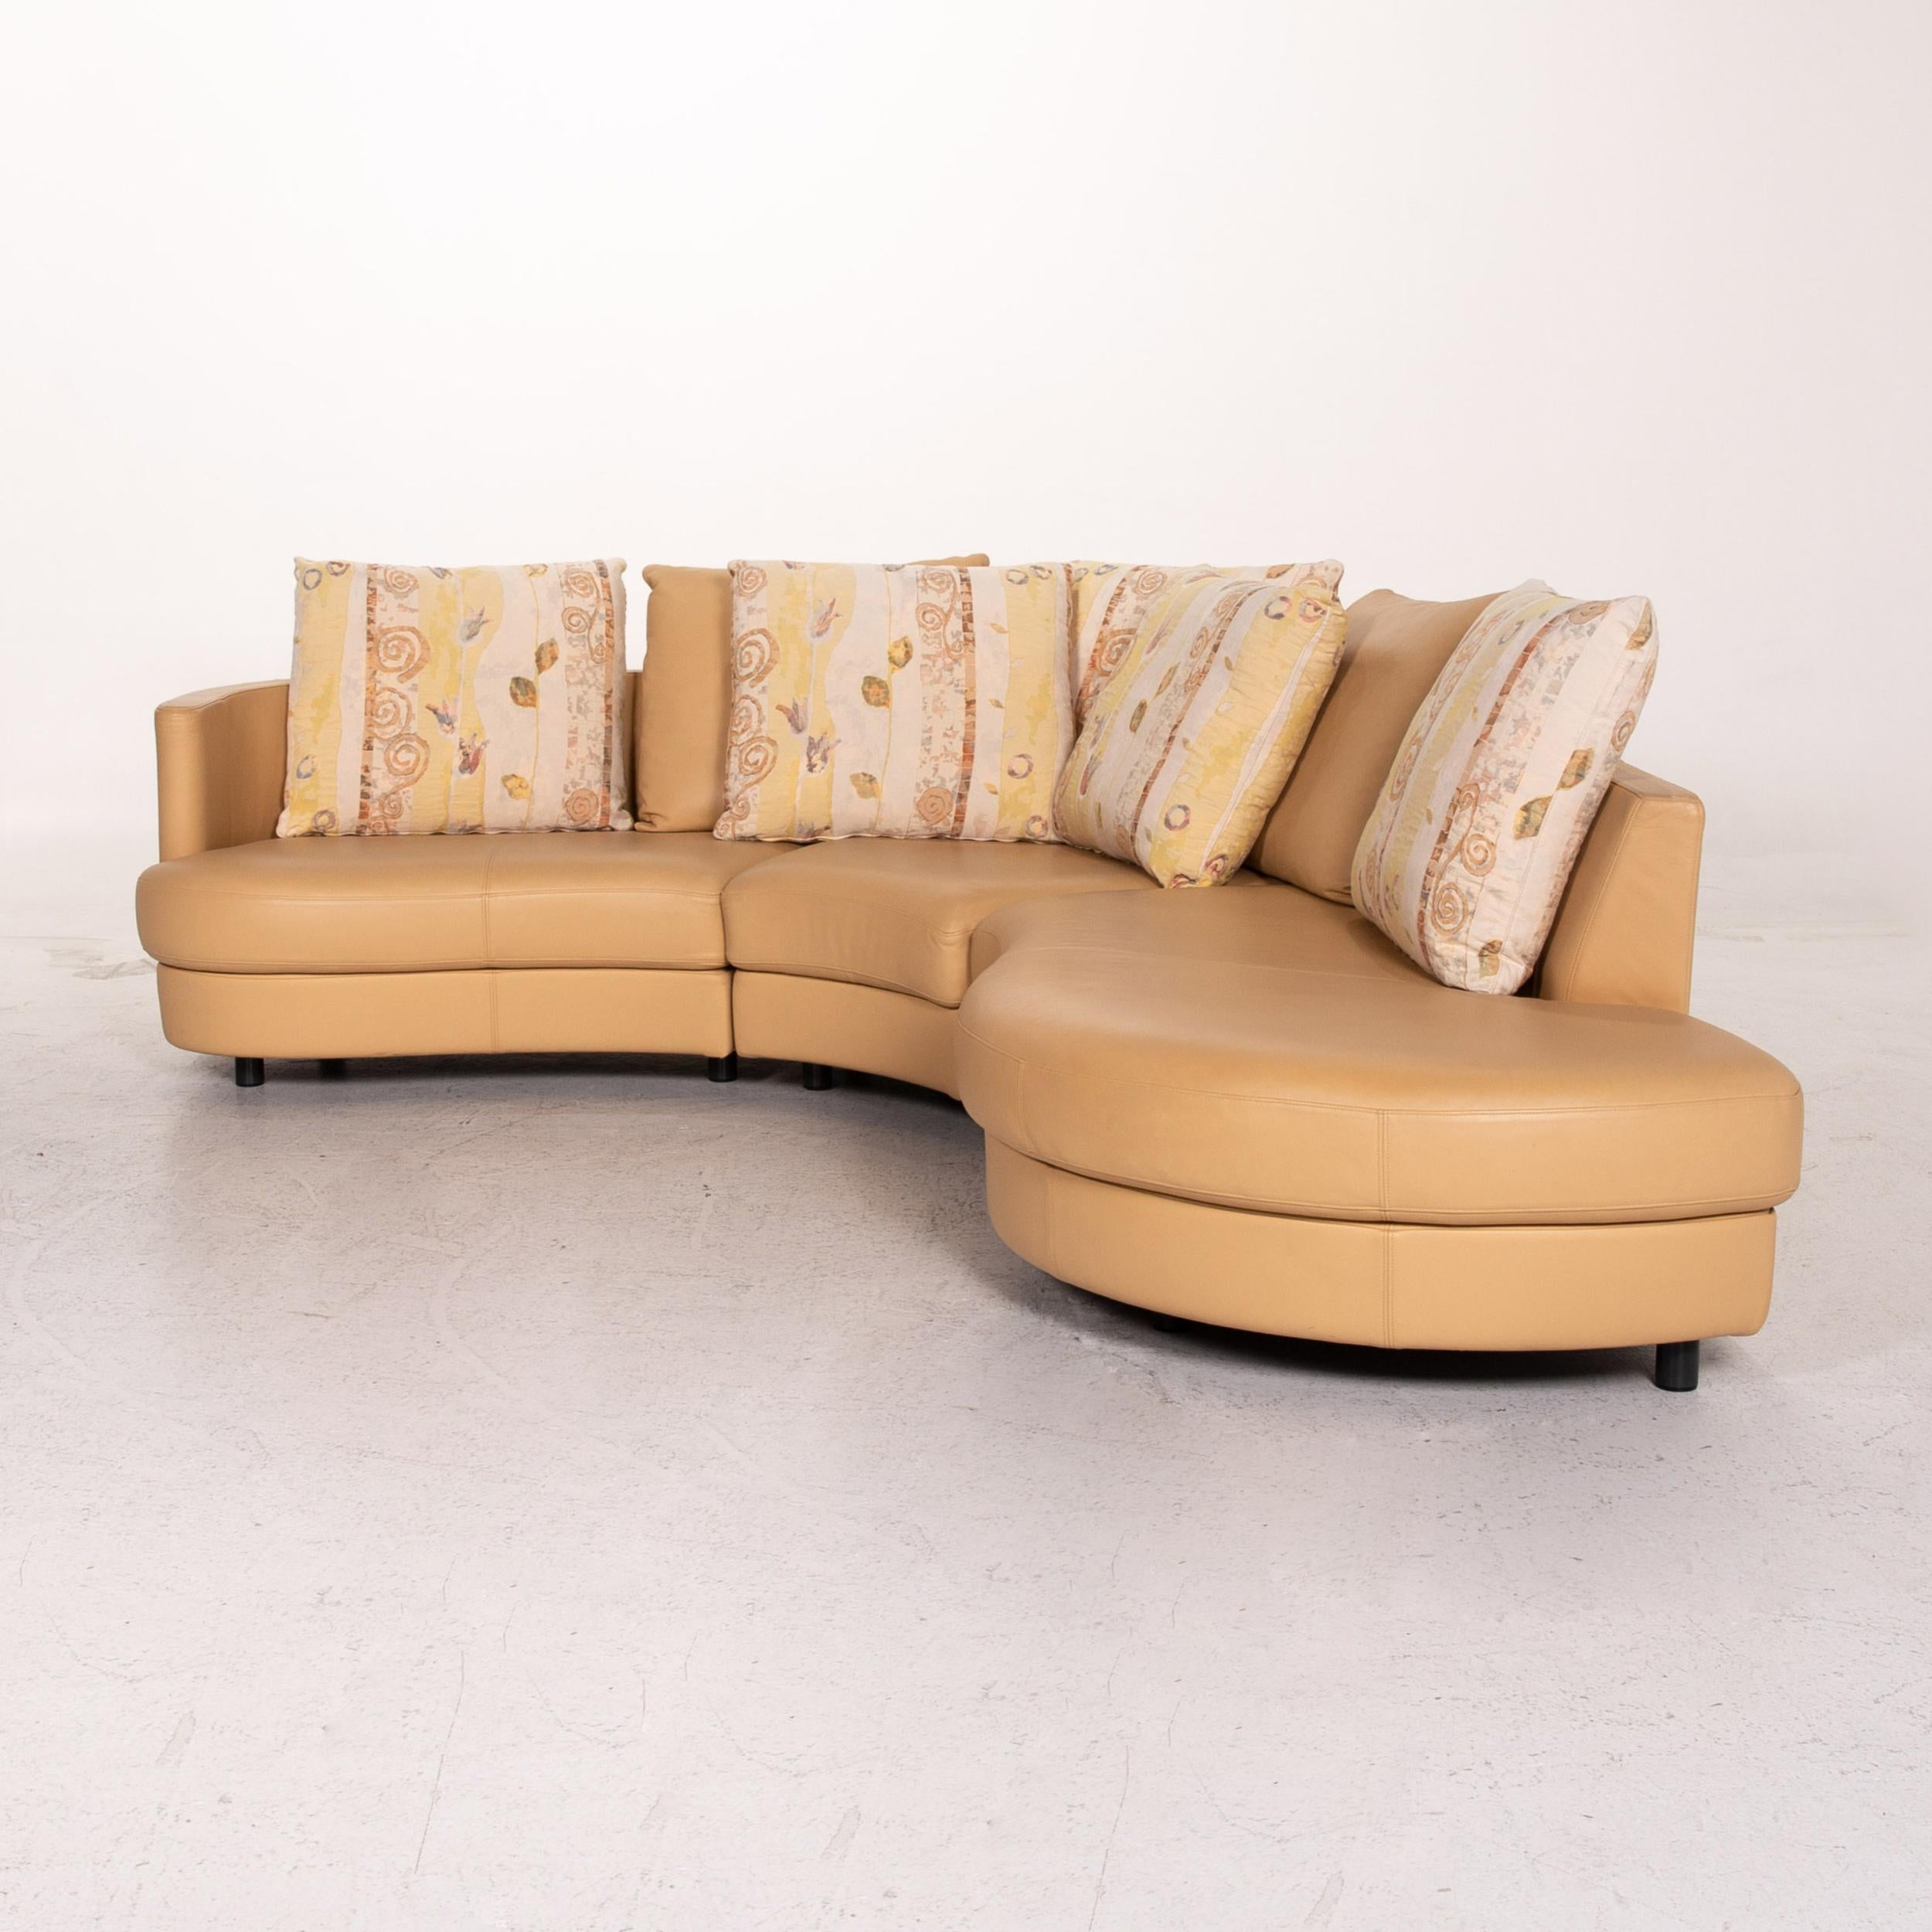 Rolf Benz Leather Corner Sofa Beige Patterned Sofa Couch 7